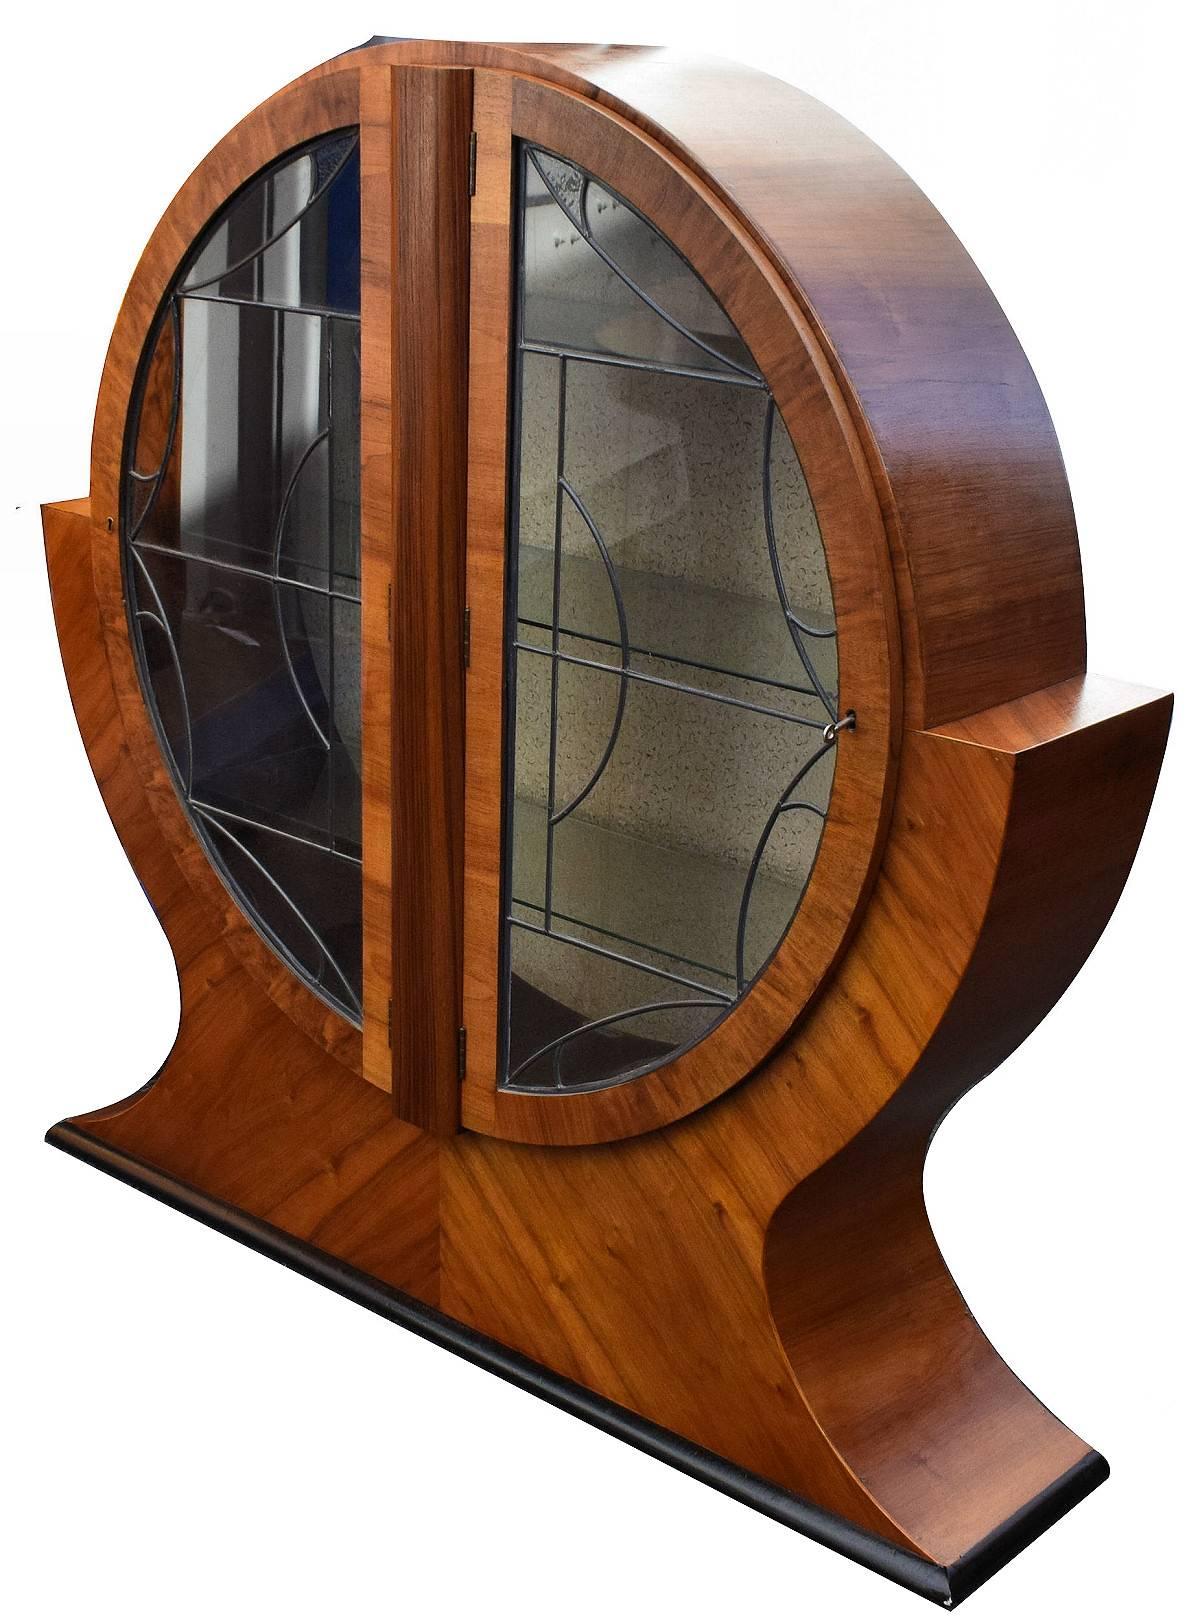 This is a superb 1930s Art Deco cabinet. This walnut cabinet is what we've chosen to call a 